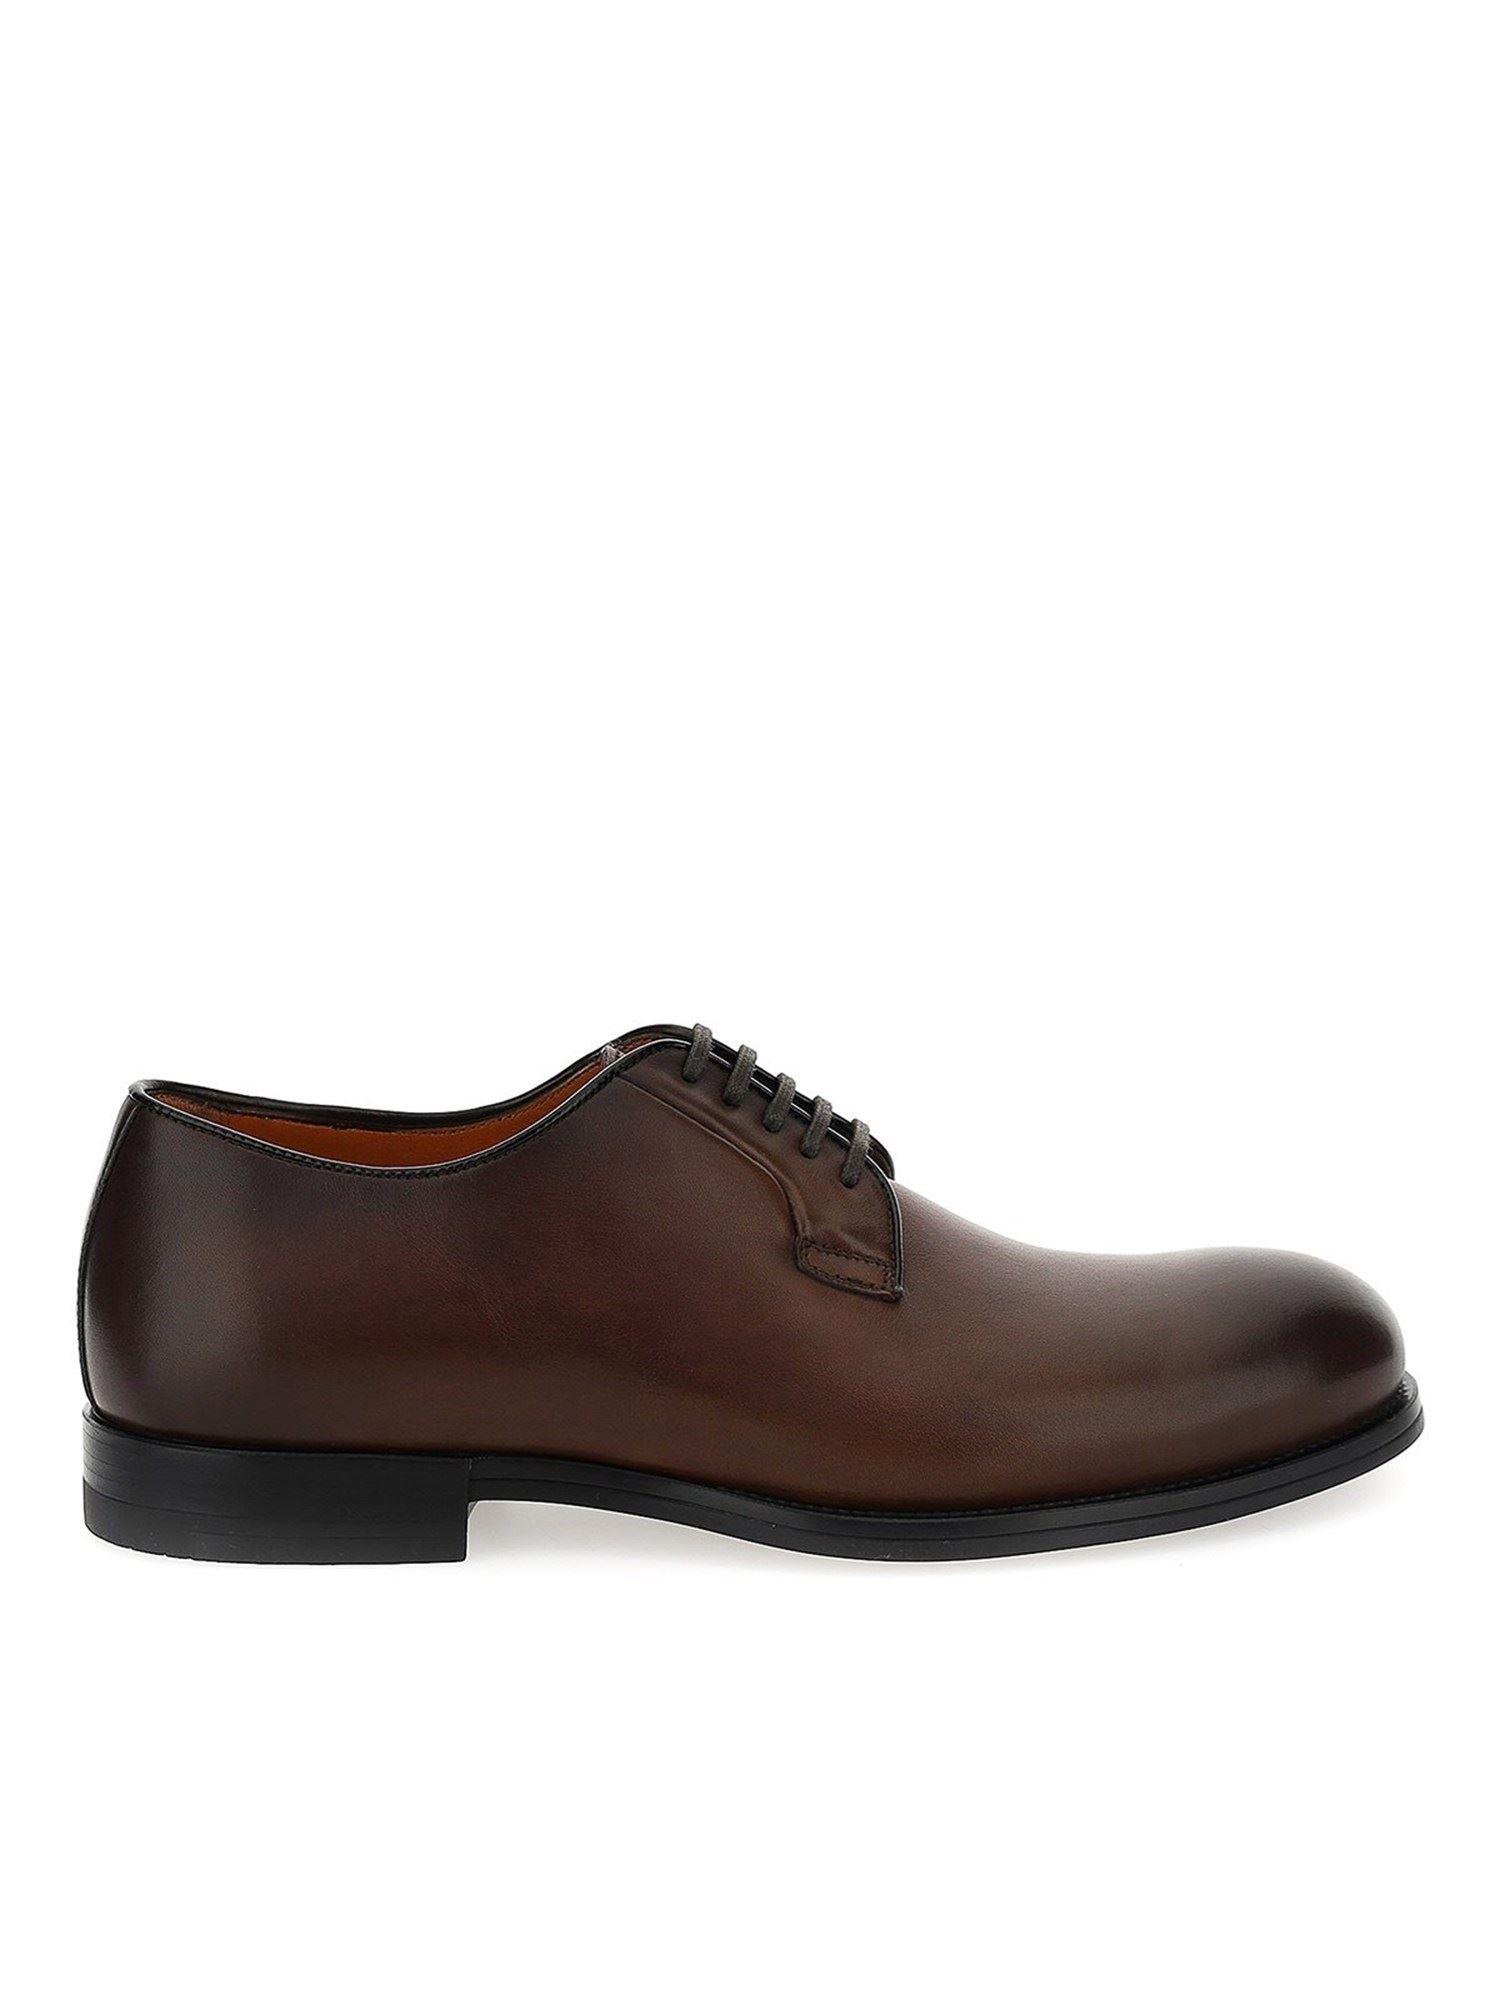 Santoni Brushed Leather Oxford Shoes in Brown for Men - Lyst